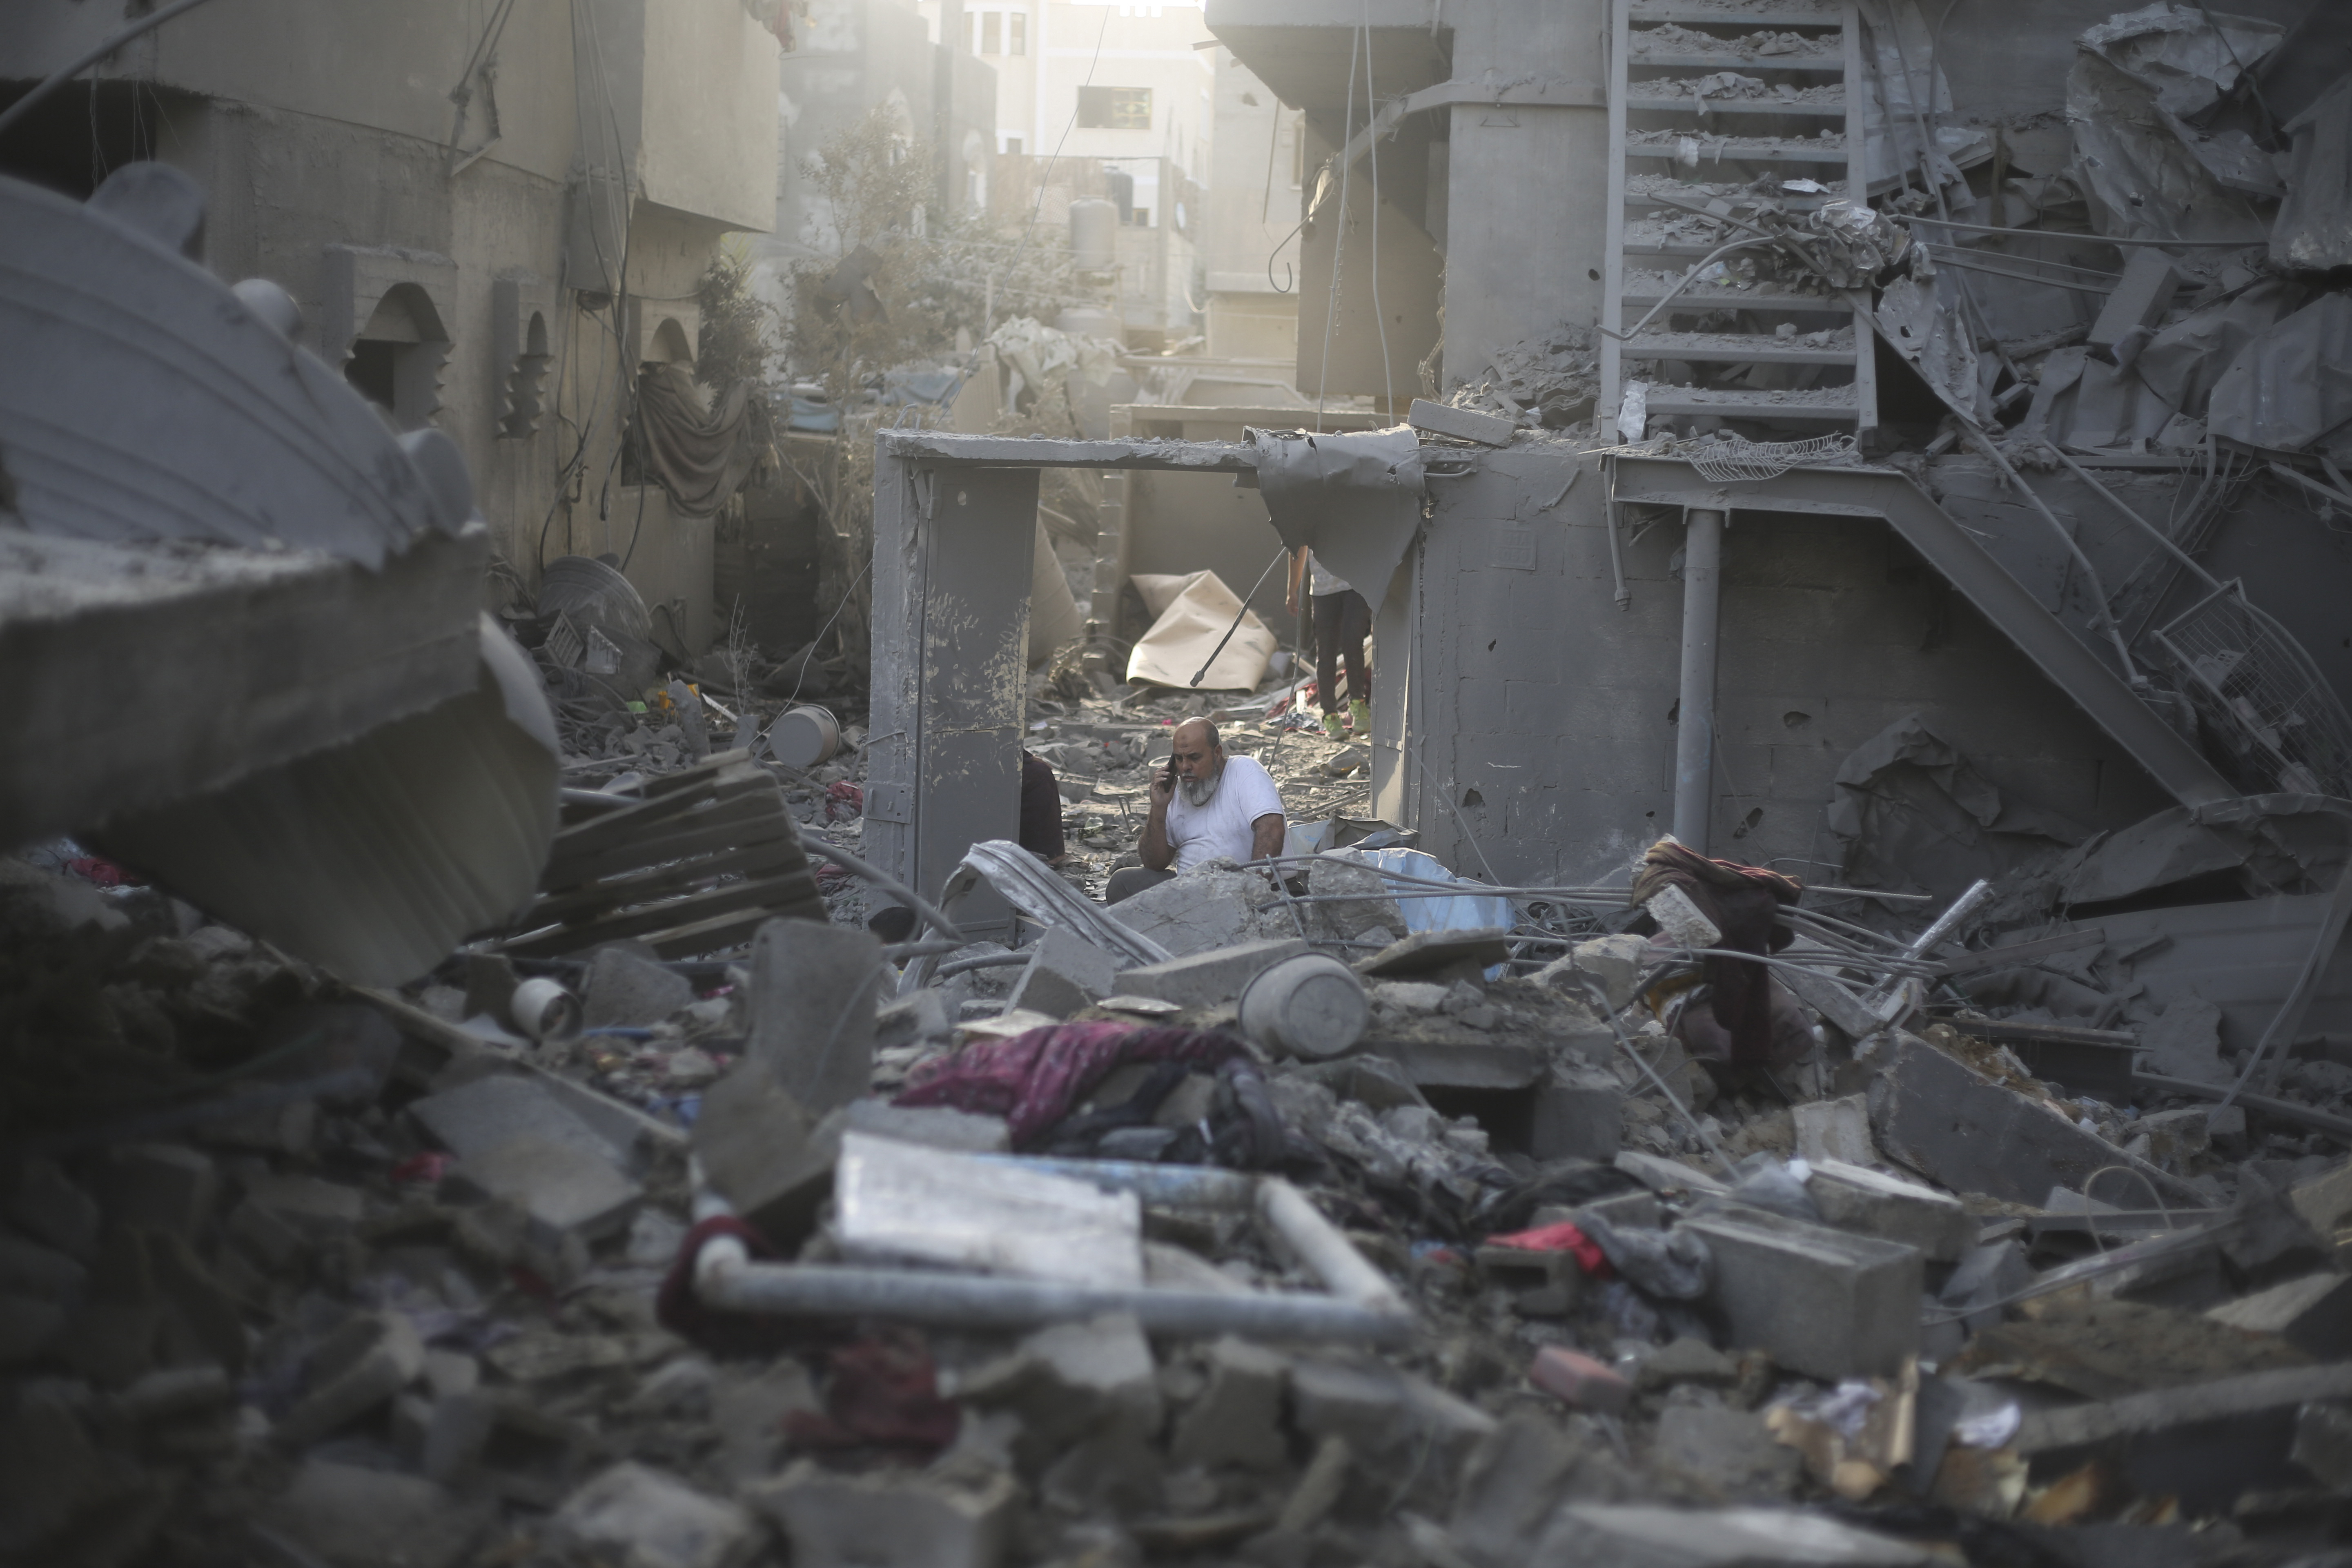 A Palestinian talks on the phone in the buildings destroyed in the Israeli bombardment